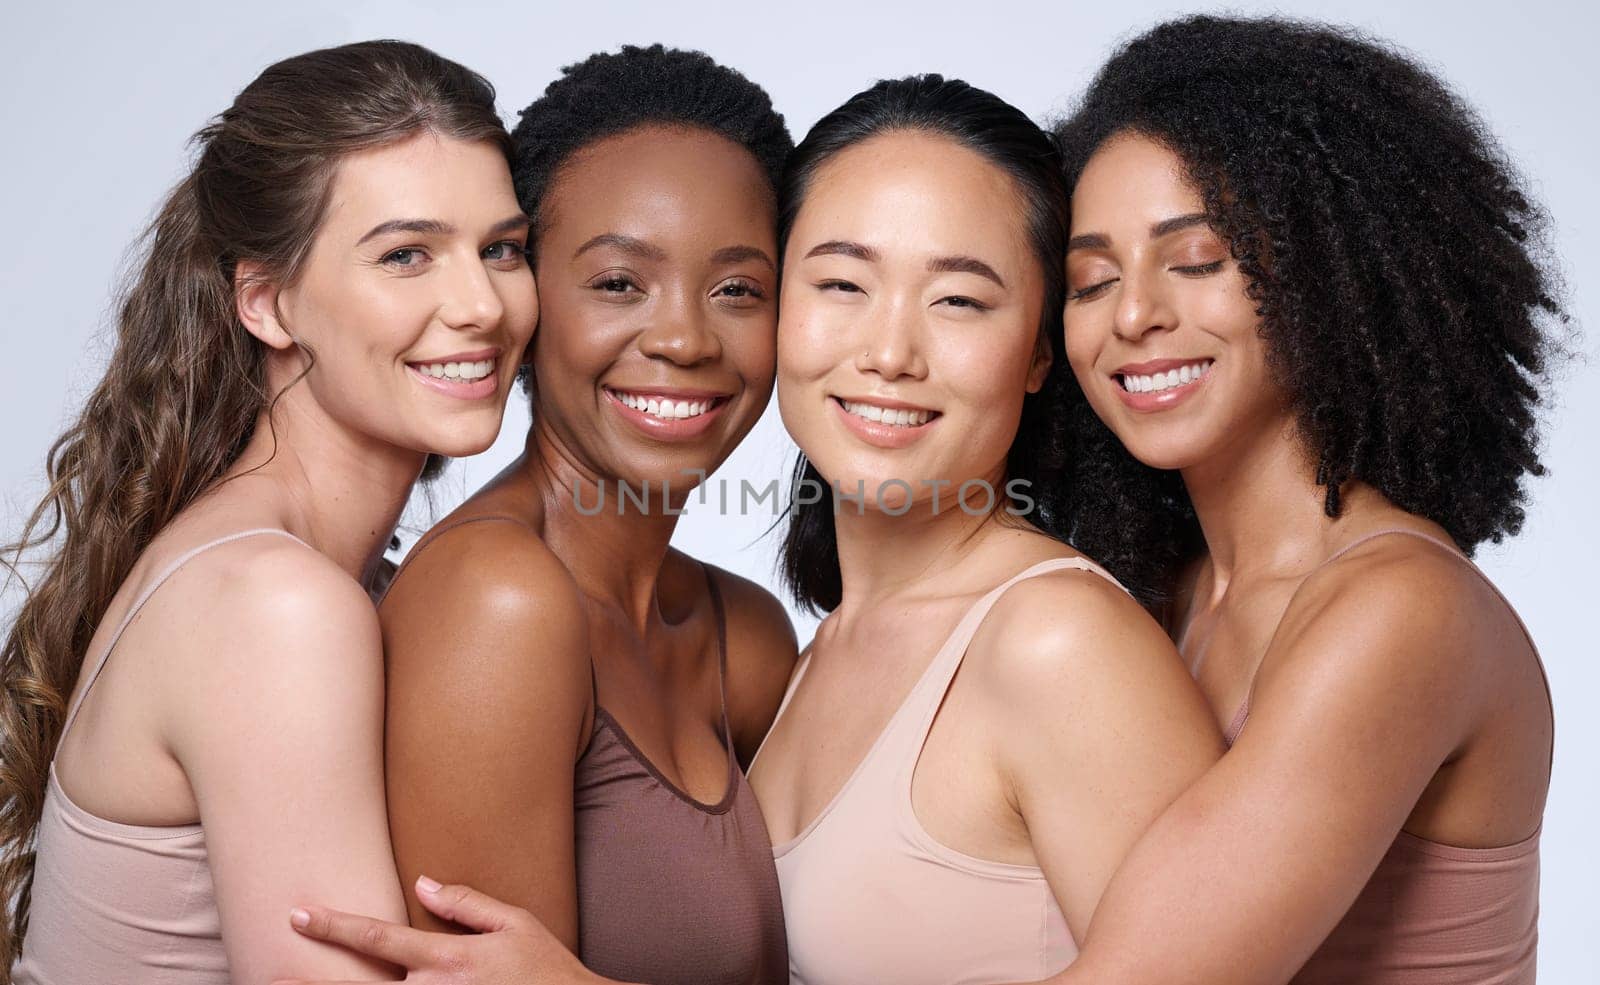 Face portrait, beauty and group of women in studio on gray background. Cosmetics, makeup and diversity of female models with glowing and flawless skin after spa facial treatment posing for skincare